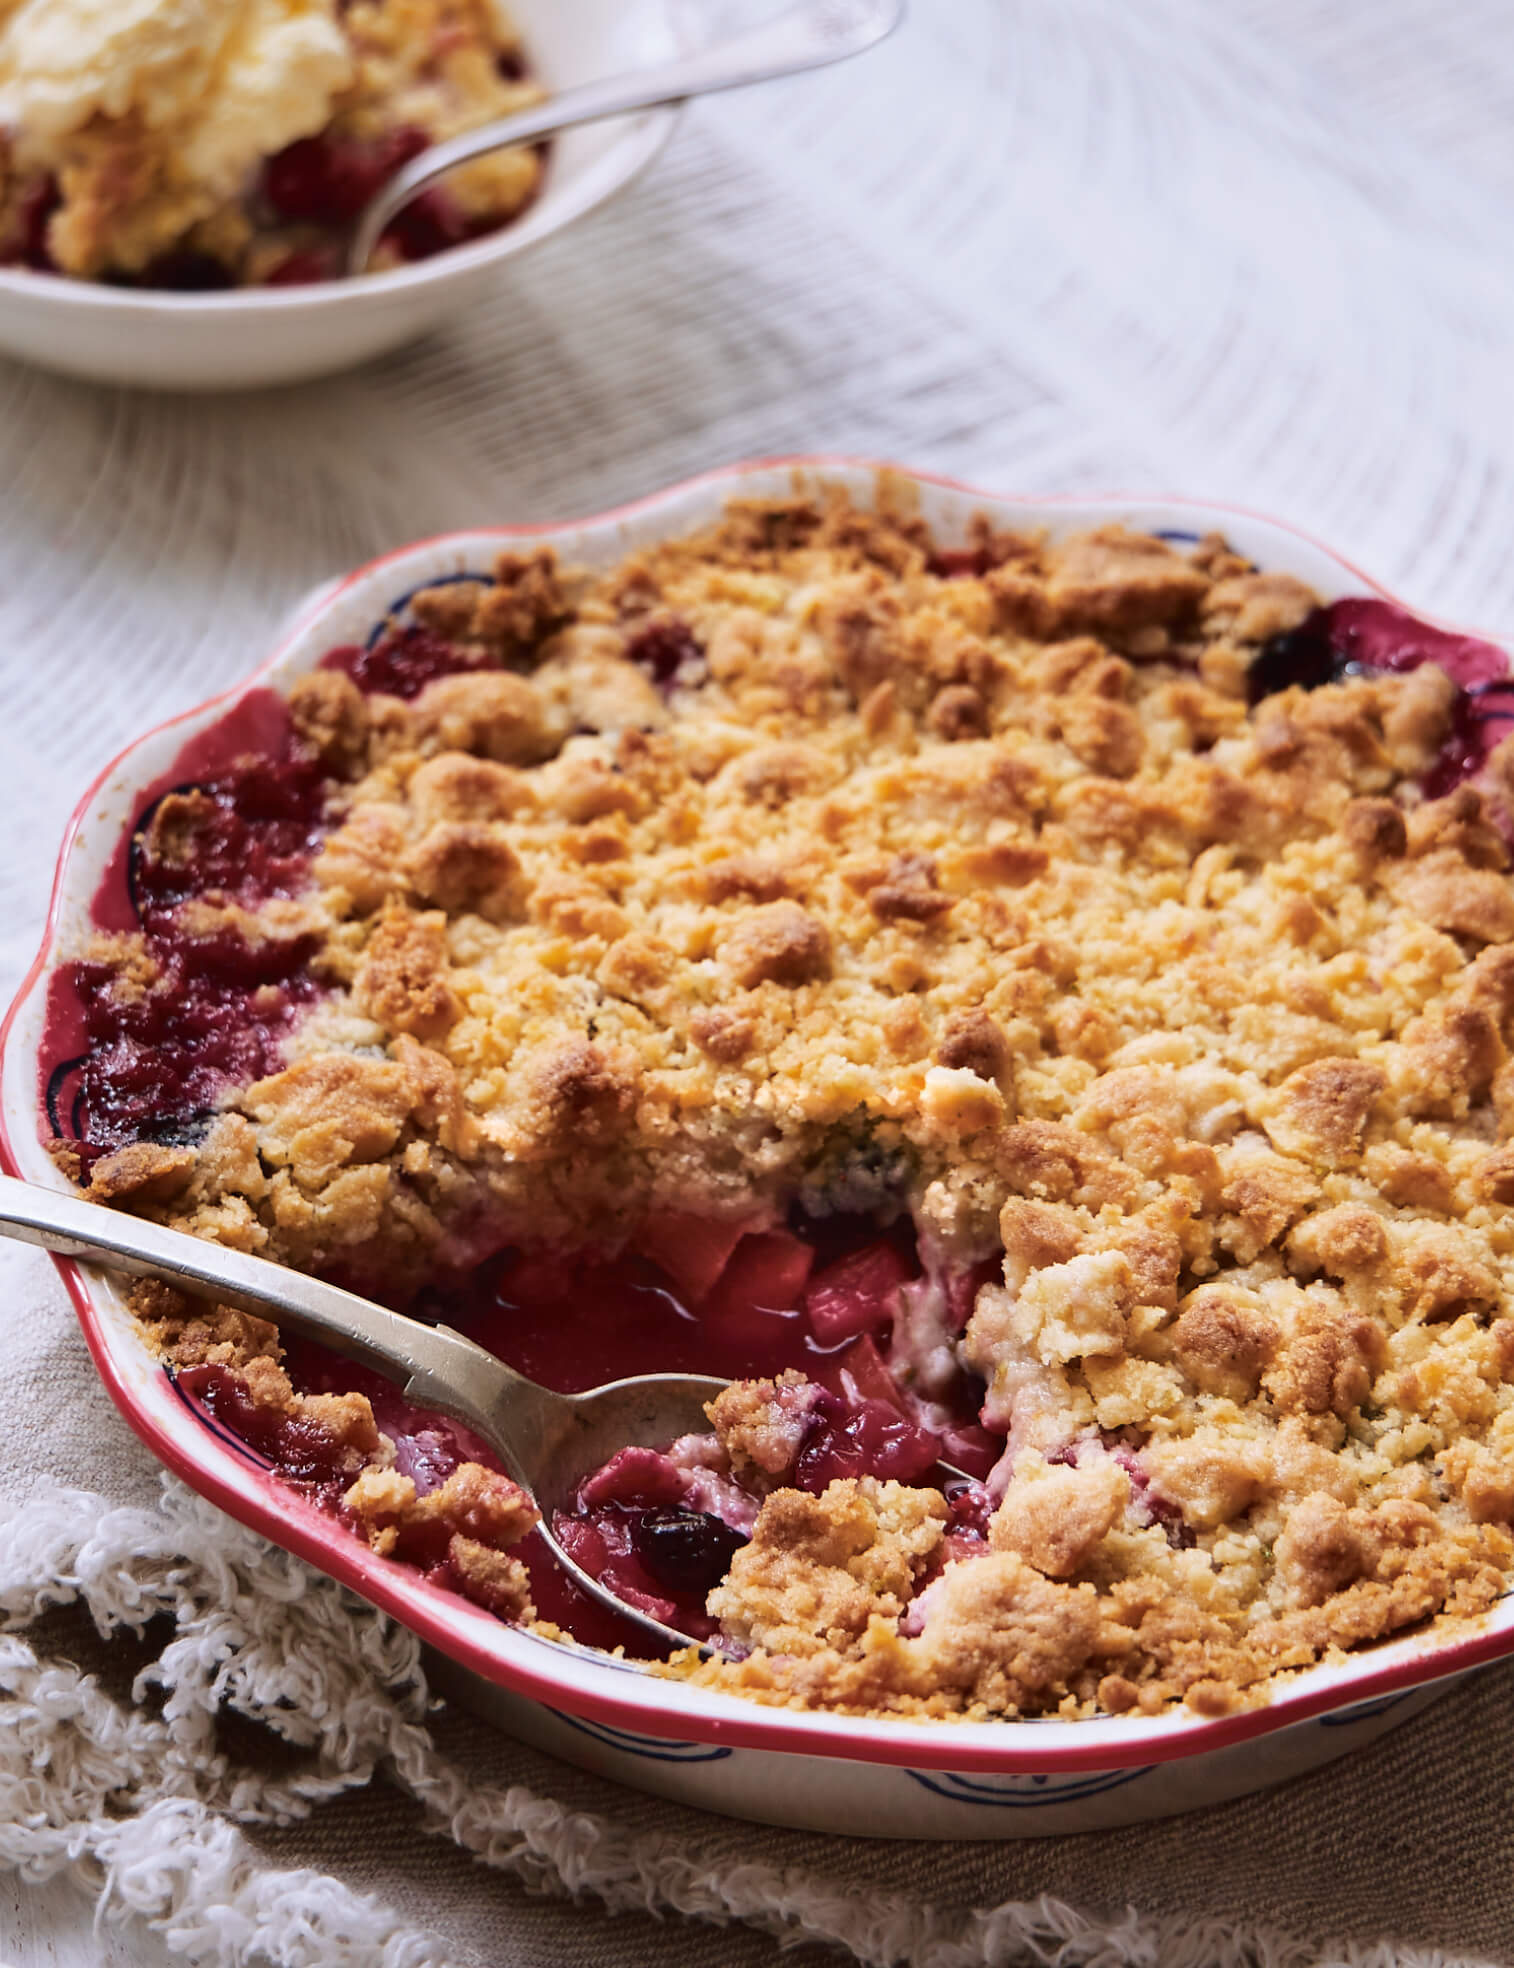 A rhubarb crumble with one serving in a white bowl on white linen